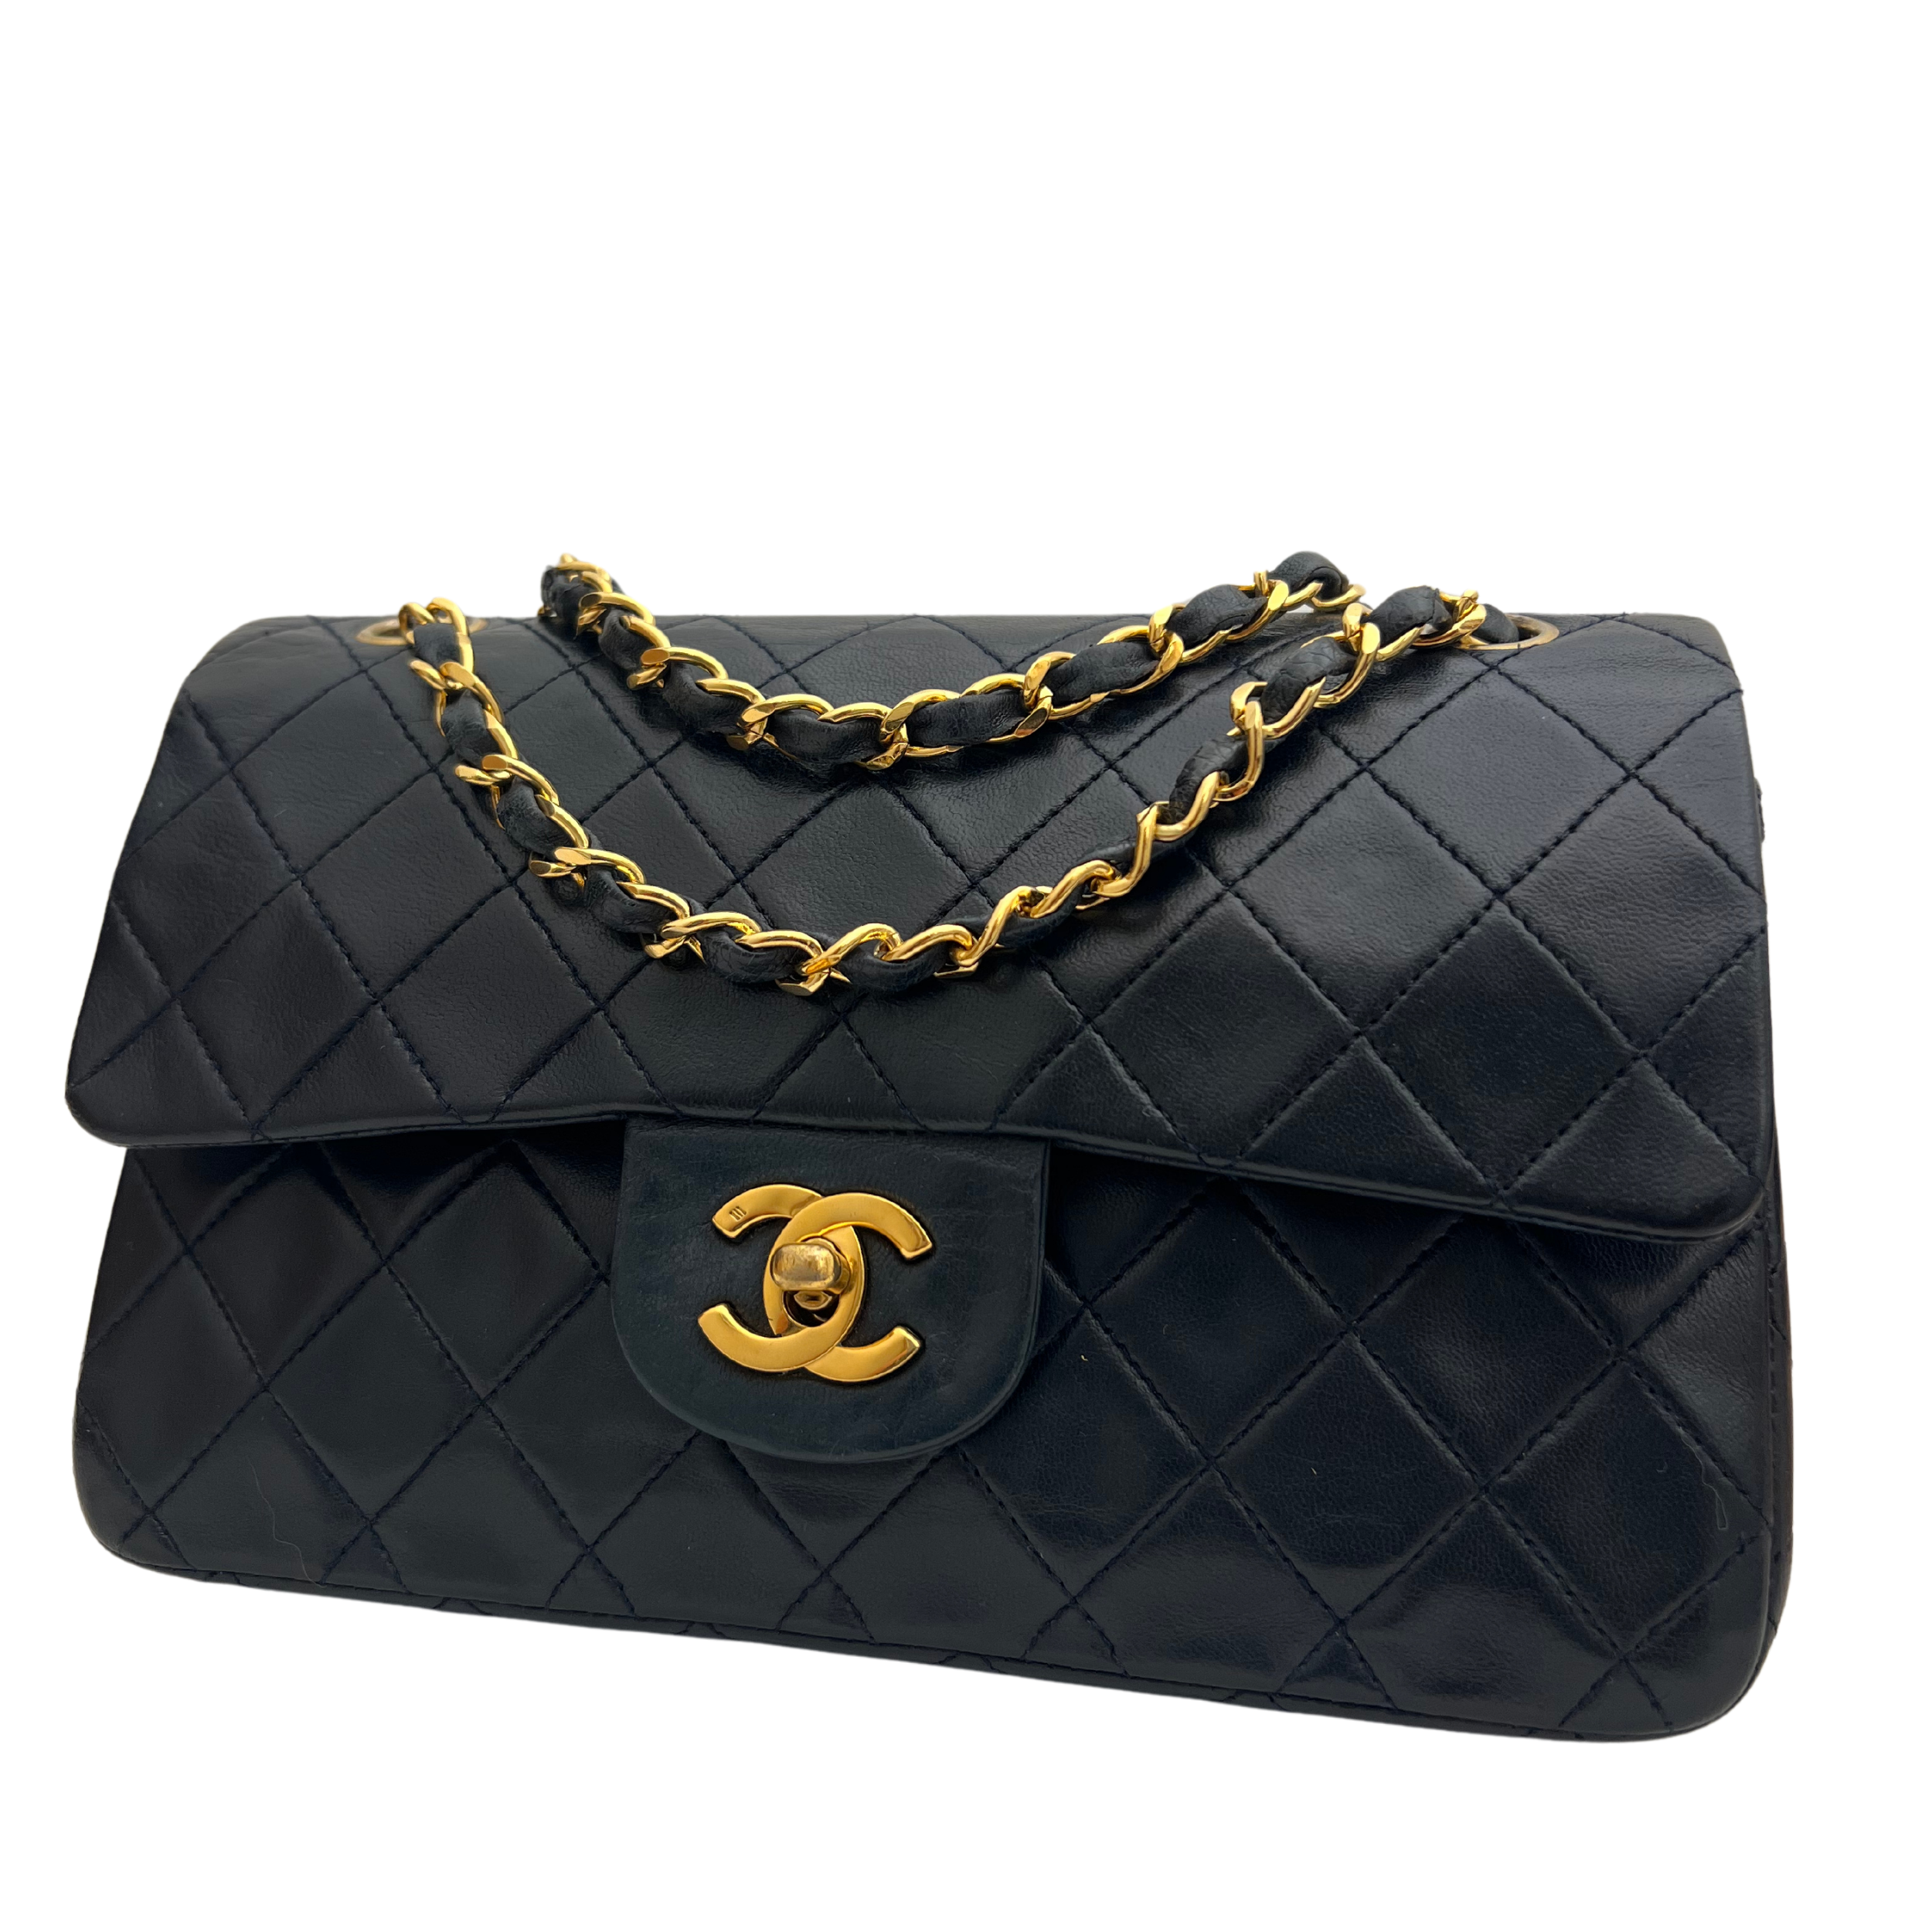 CLASSIC TIMELESS SMALL - CHANEL Lola Collective